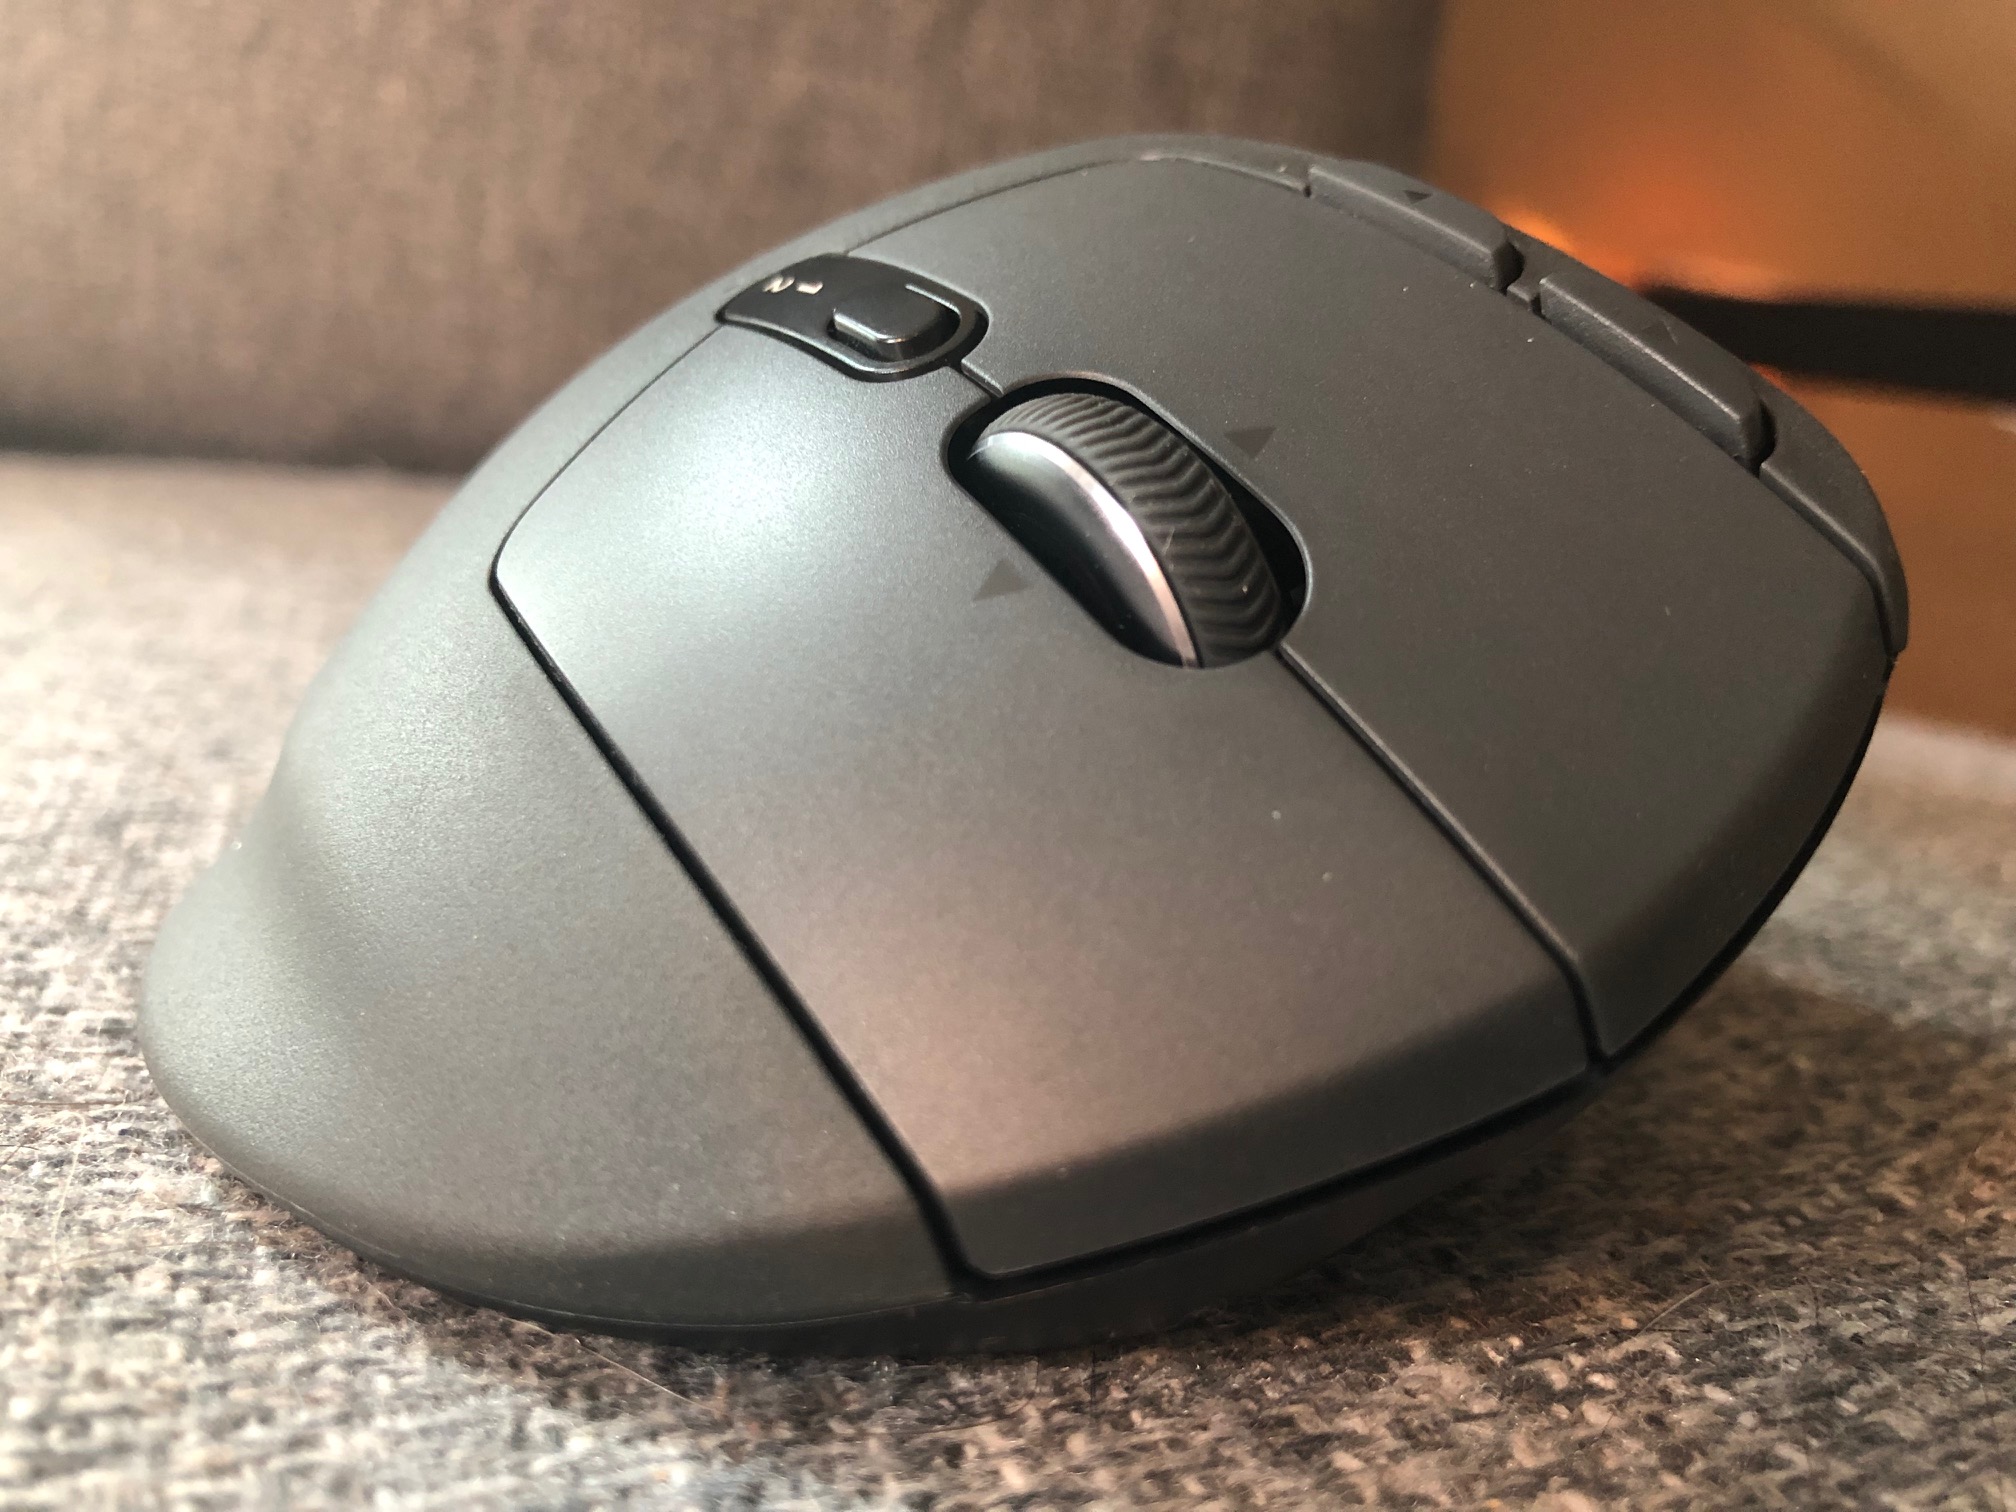 Logitech MX Ergo Mouse Review (Hardware) - Official GBAtemp Review |  GBAtemp.net - The Independent Video Game Community